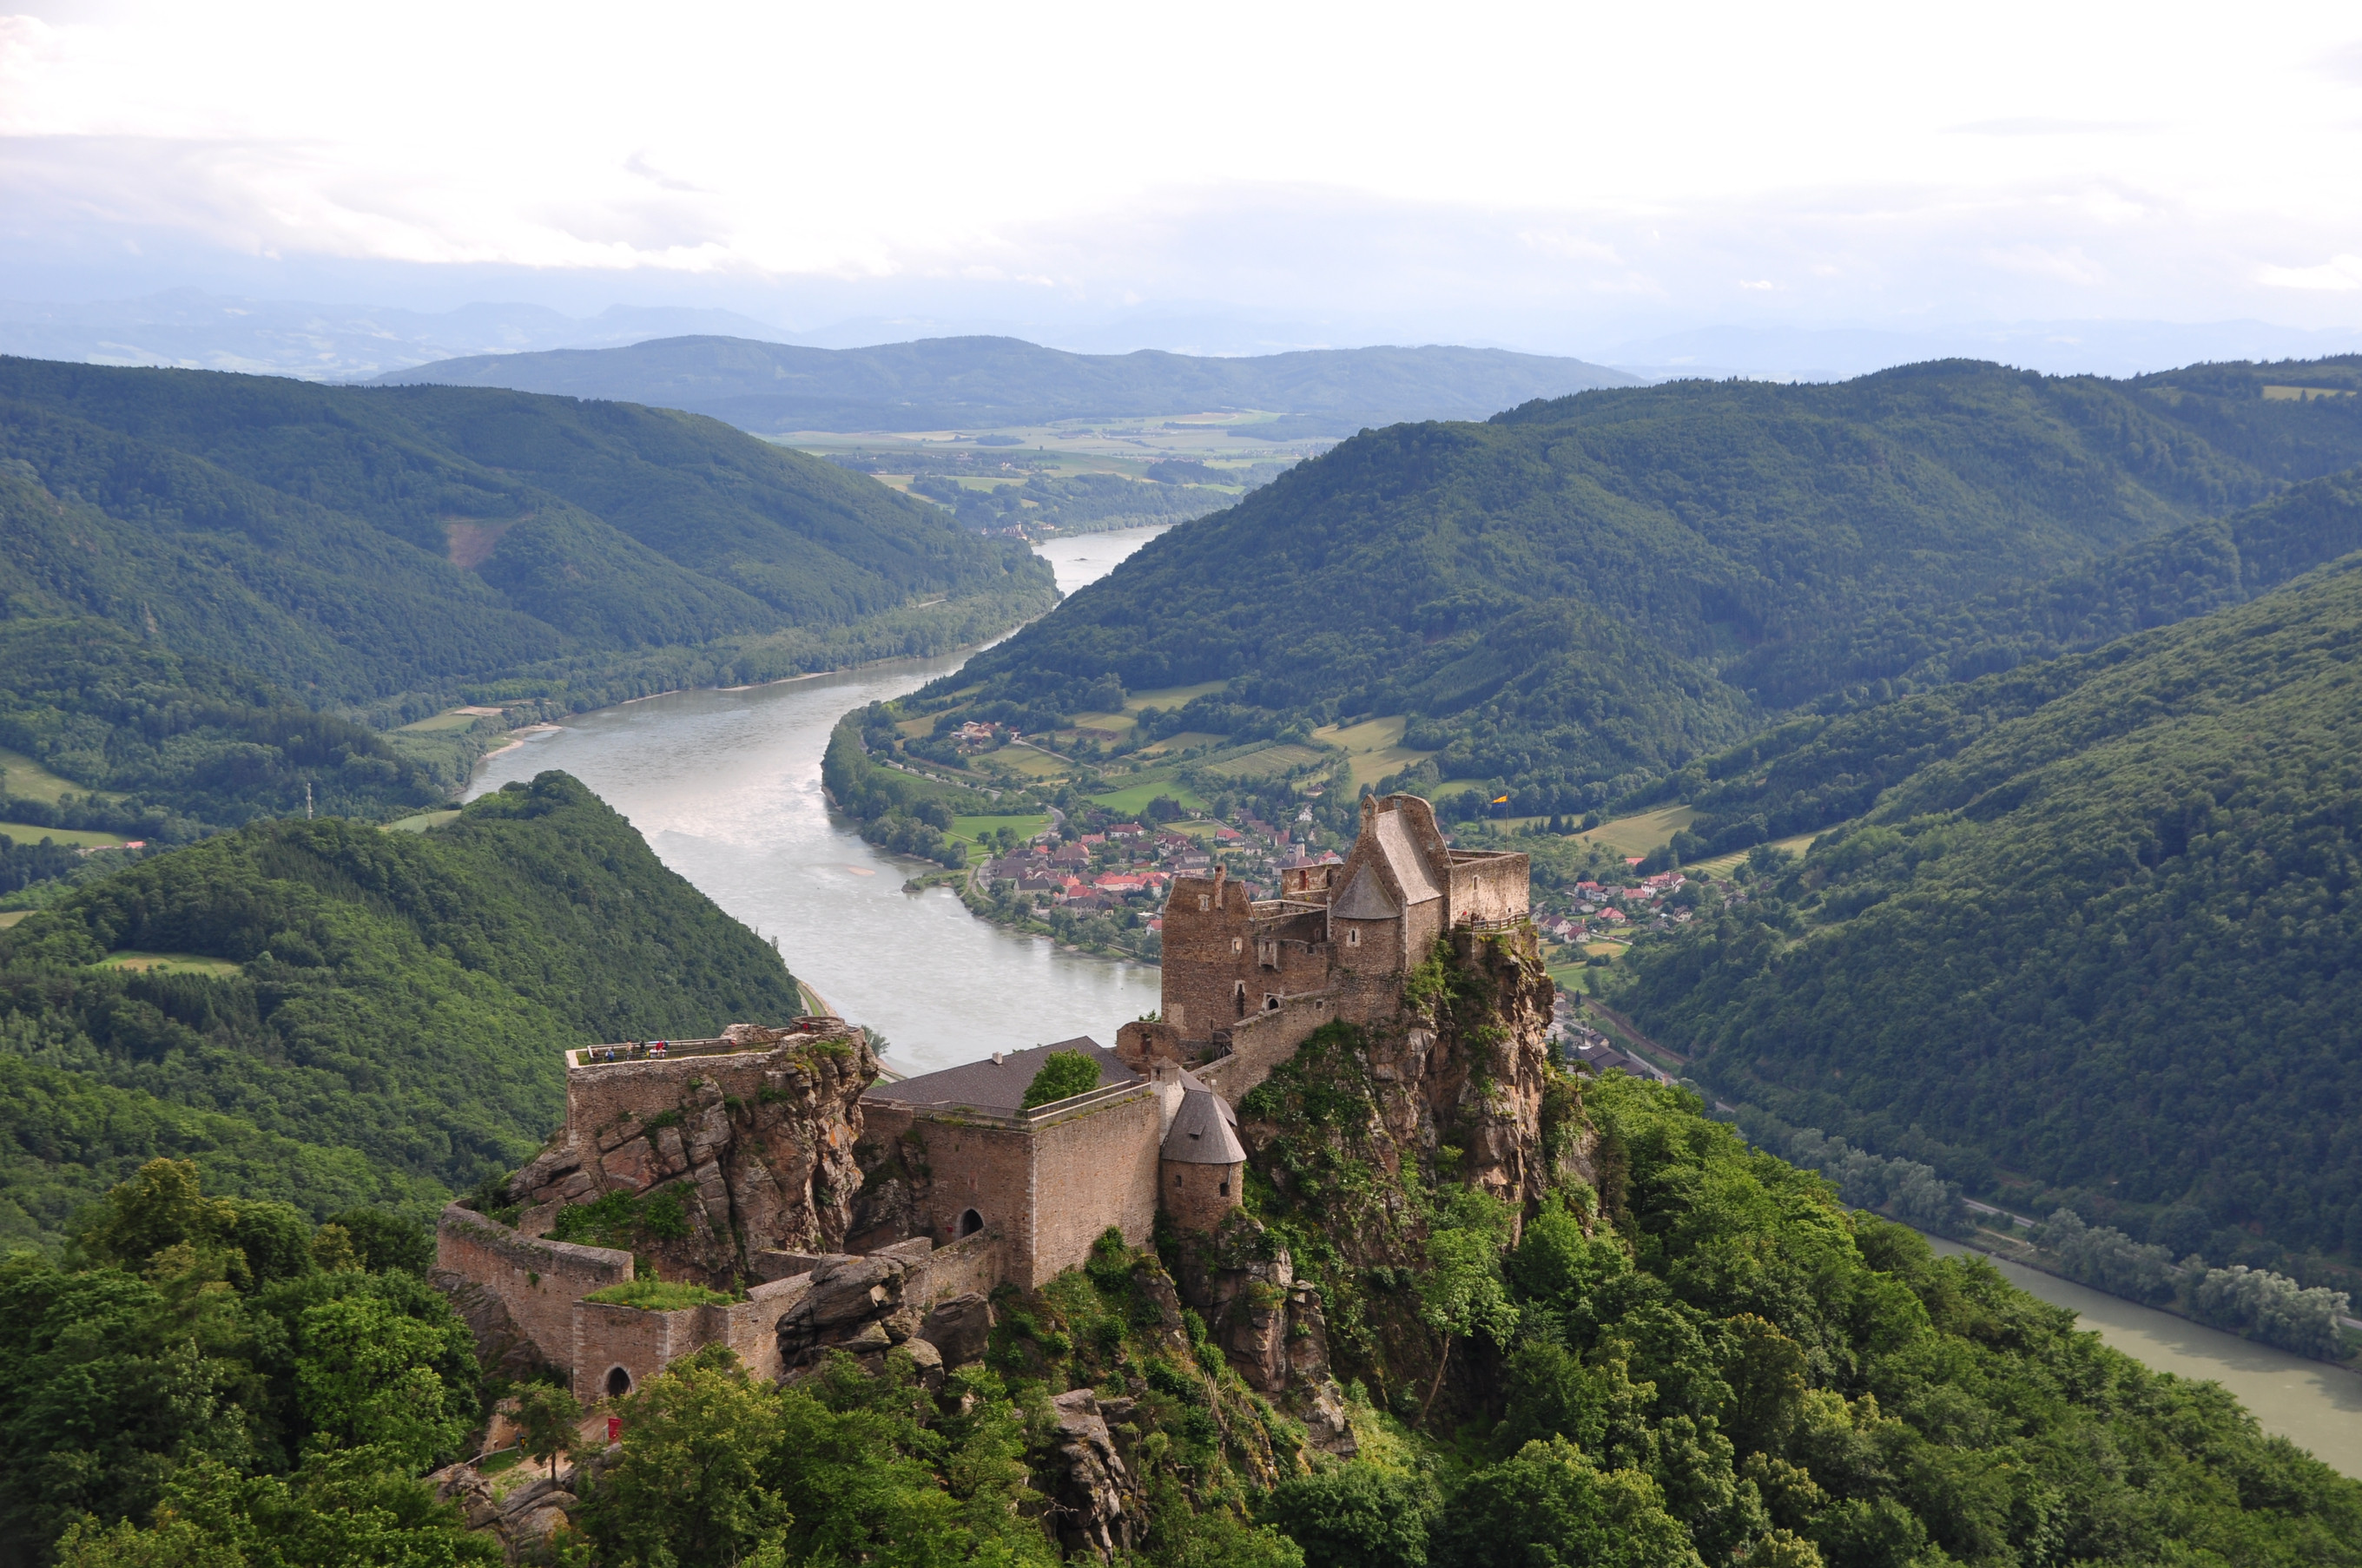 a castle on a hill overlooking a river and lush countryside.